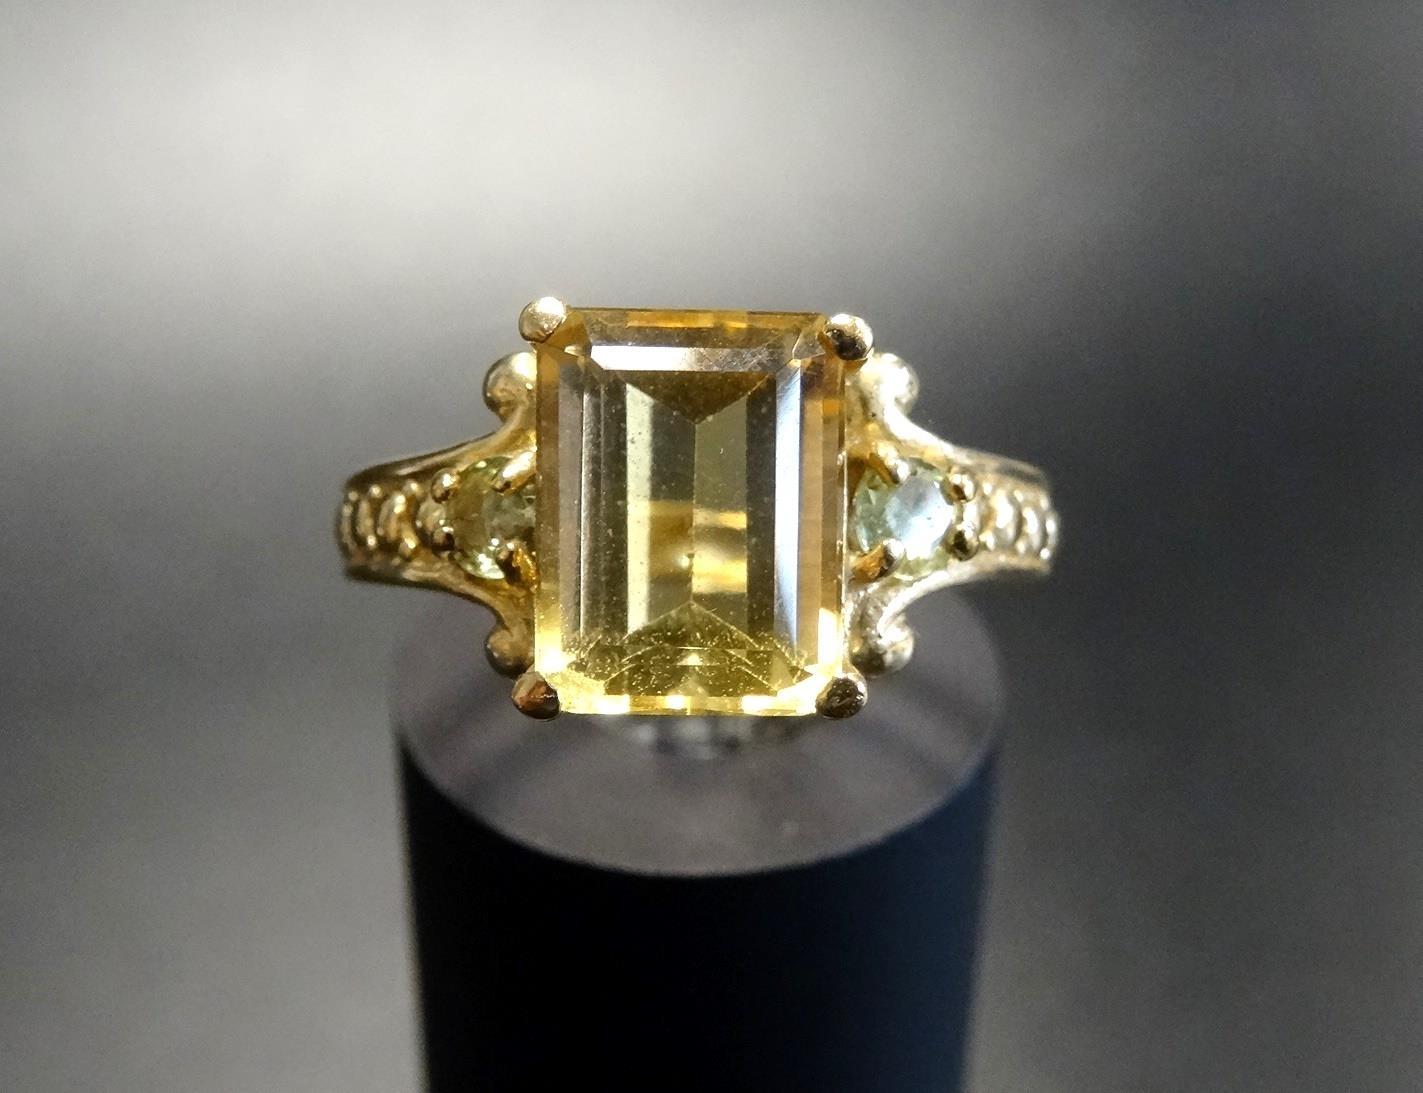 YELLOW BERYL AND PERIDOT DRESS RING the central emerald cut yellow beryl flanked by a round cut